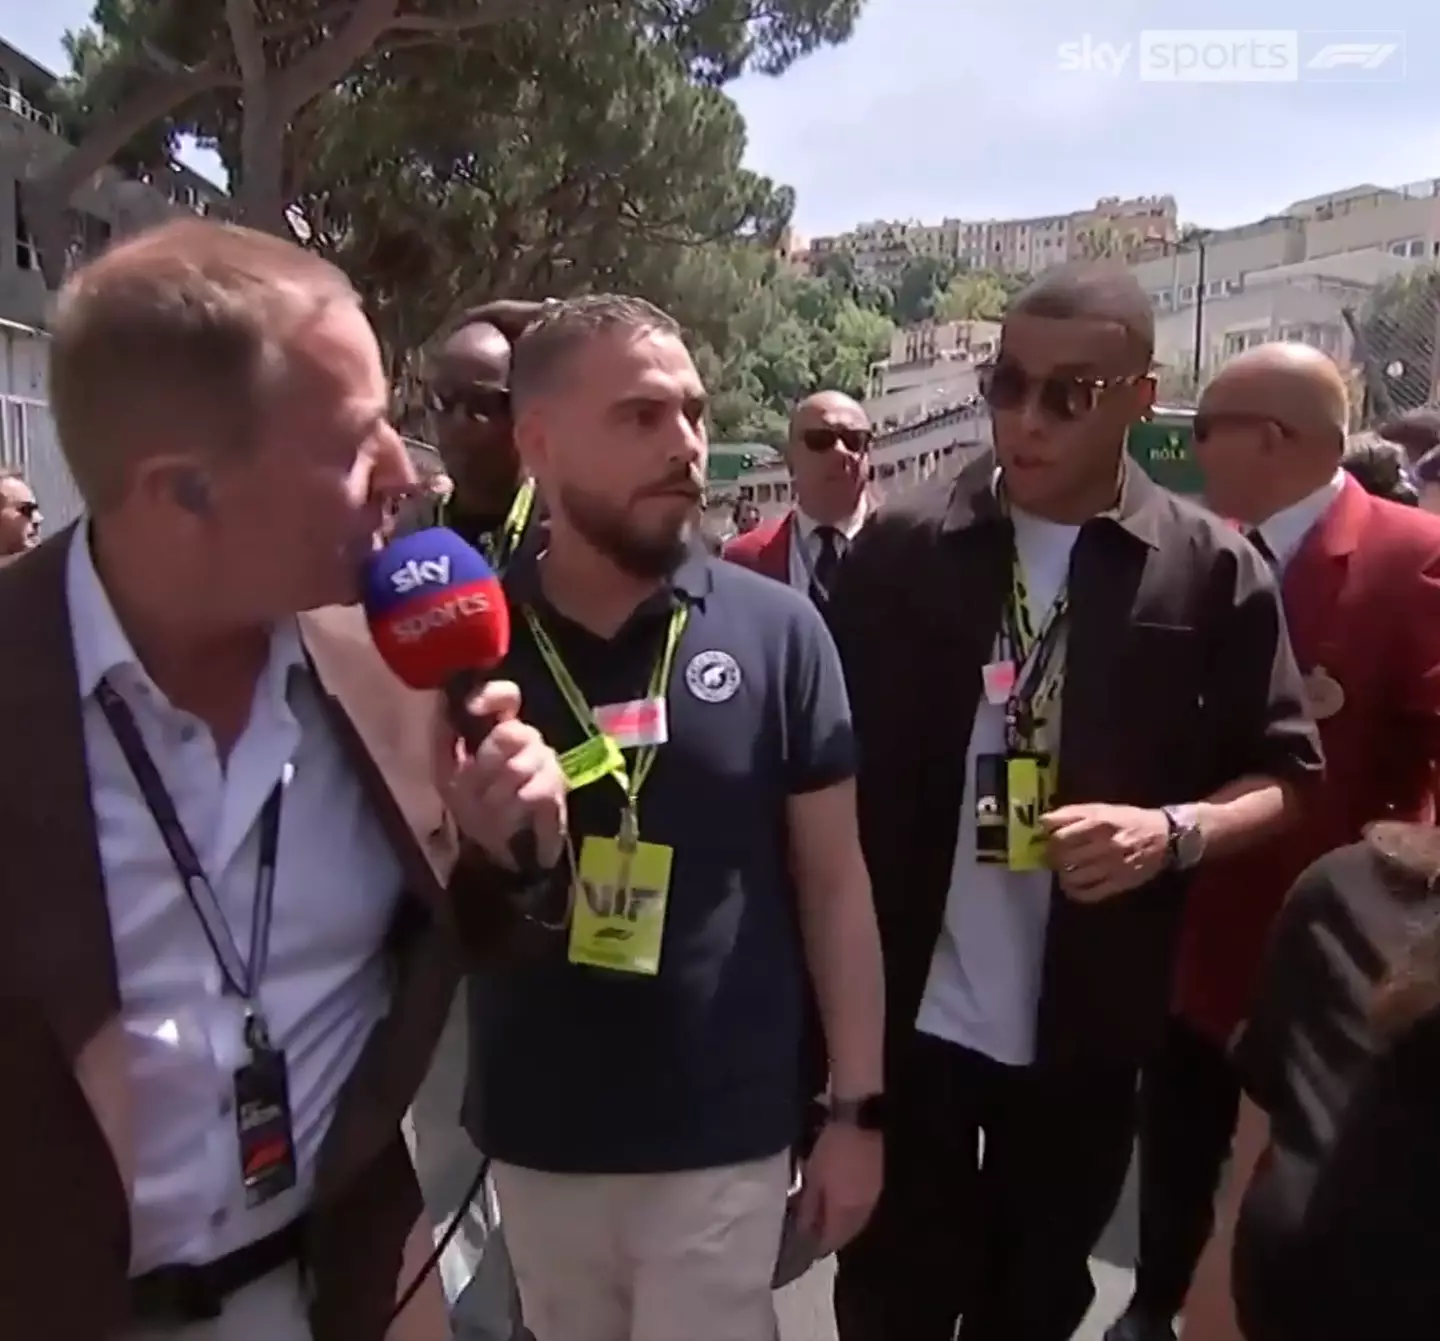 Once it was established who was in charge, Brundle got a few words out of Mbappe. (X/@SkySportsF1)